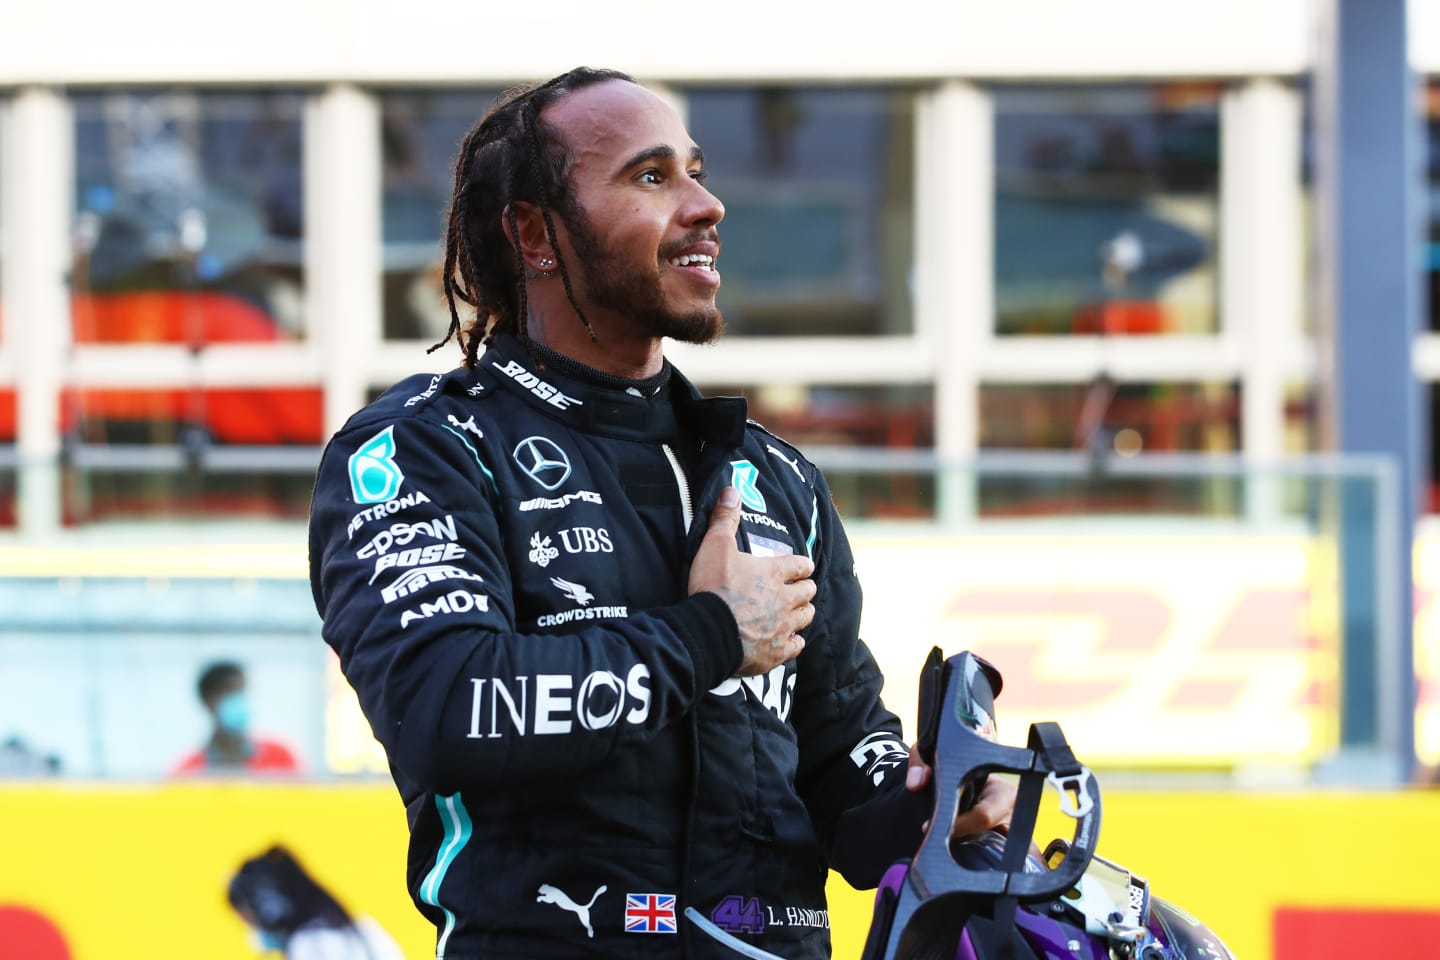 SCARPERIA, ITALY - SEPTEMBER 13: Race winner Lewis Hamilton of Great Britain and Mercedes GP celebrates in parc ferme during the F1 Grand Prix of Tuscany at Mugello Circuit on September 13, 2020 in Scarperia, Italy. (Photo by Bryn Lennon/Getty Images)